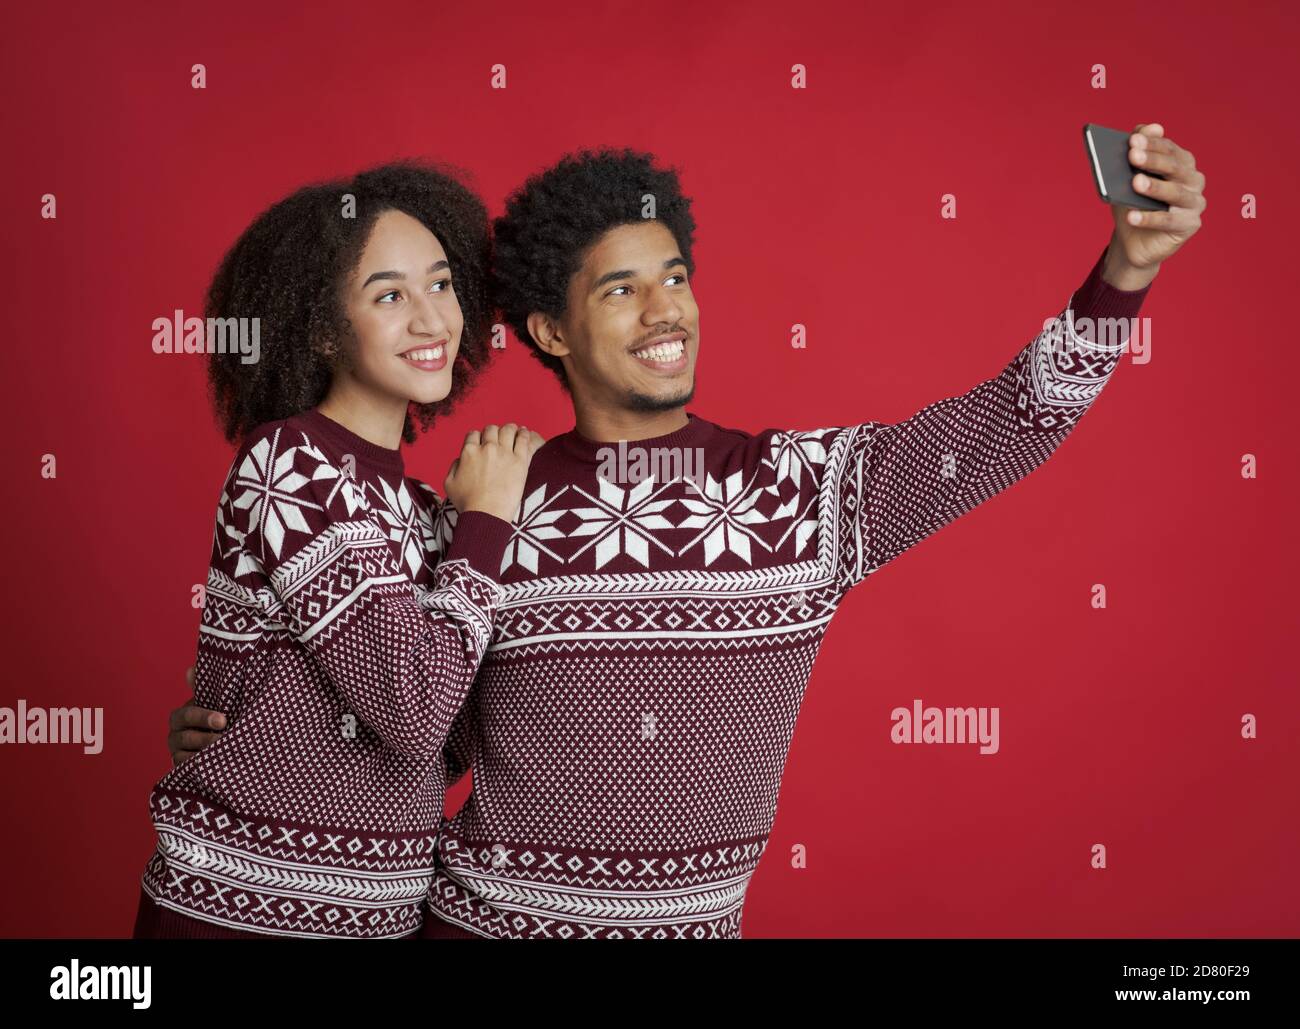 Guy and lady in identical New Year outfits happily pose for selfie Stock Photo